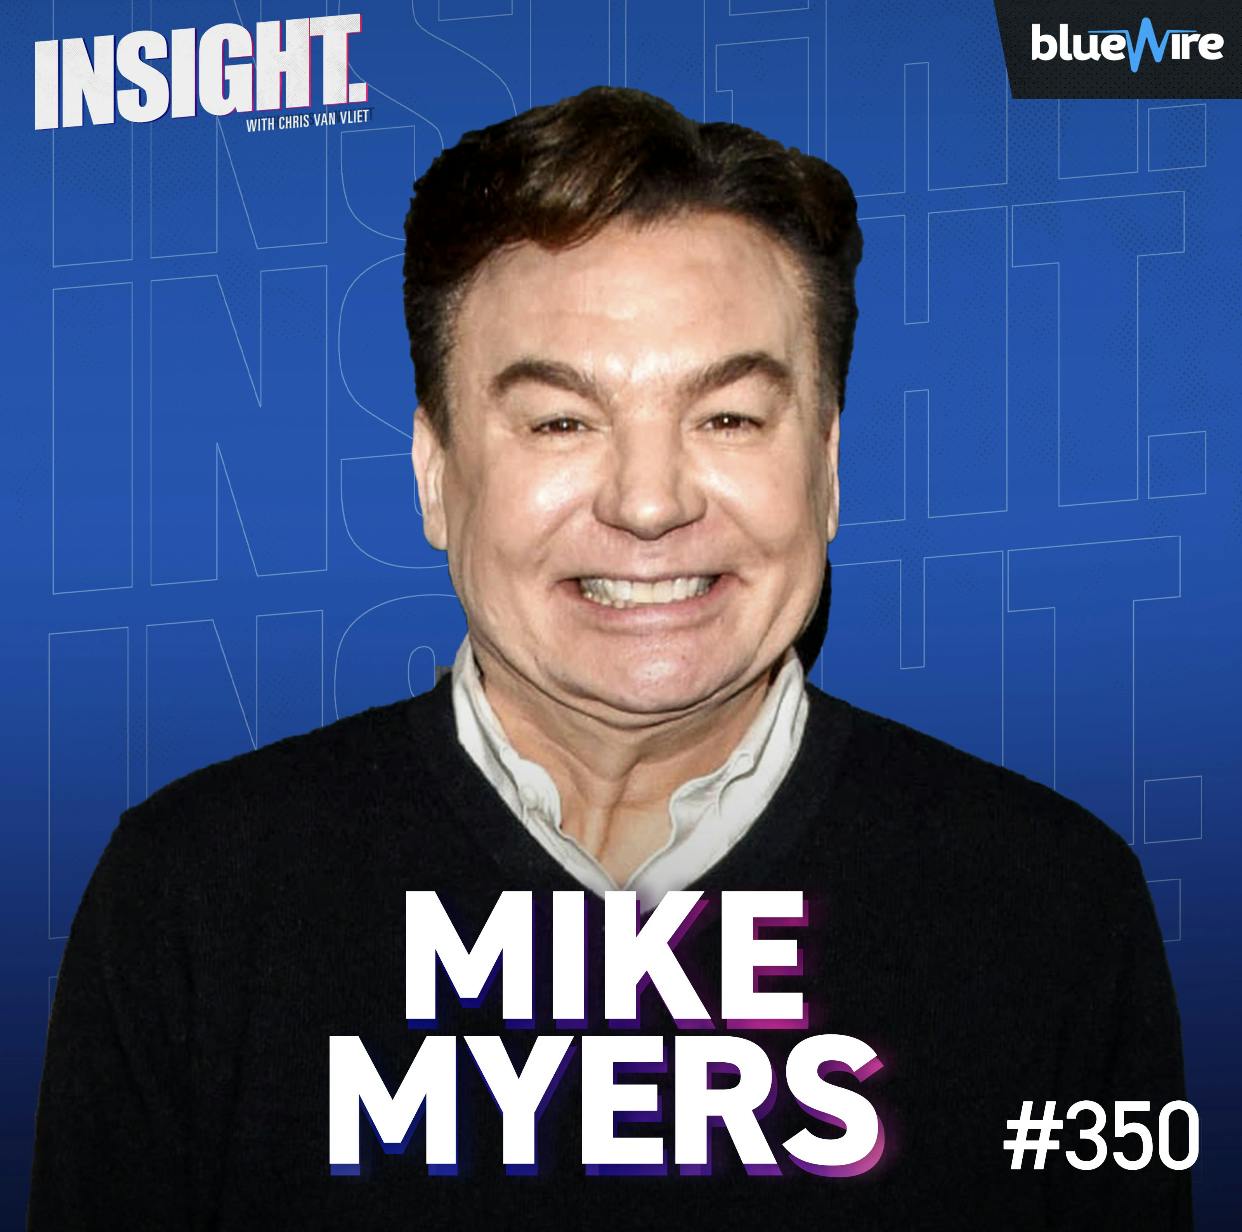 Mike Myers: From Austin Powers to Wayne's World, Advice From A Comedy Legend